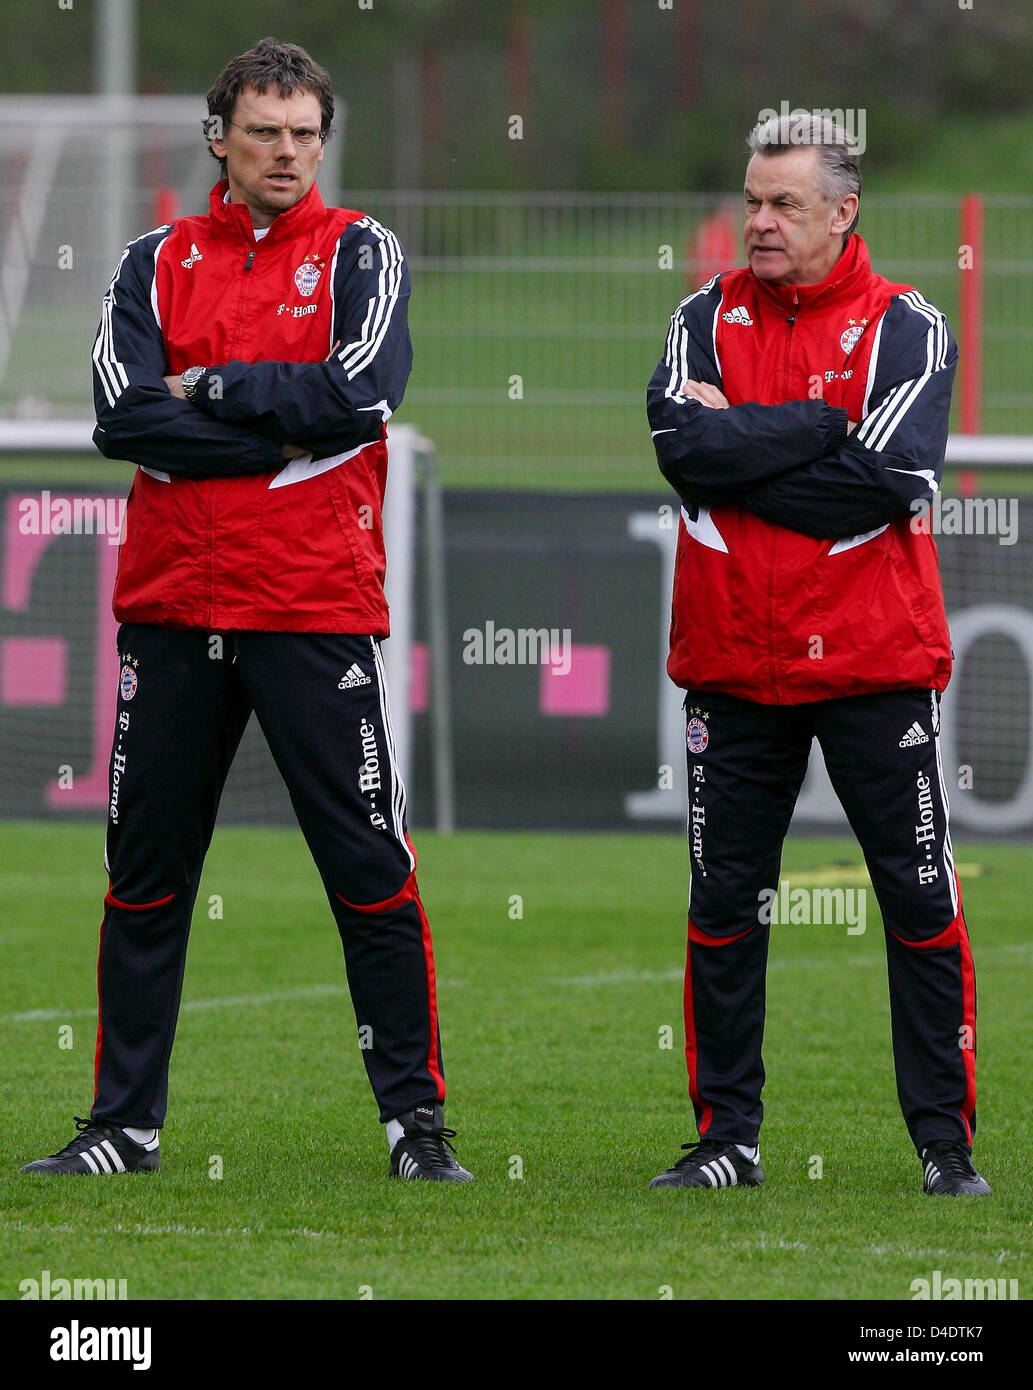 FC Bayern Munich coach, Ottmar Hitzfeld (R), and Michael Henke are pictured during team practice in Munich, Germany, 23 April 2008. Bayern Munich will face Zenit St. Petersburg in the UEFA-Cup semifinal on Thursday, 24 April. Photo: MATTHIAS SCHRADER Stock Photo